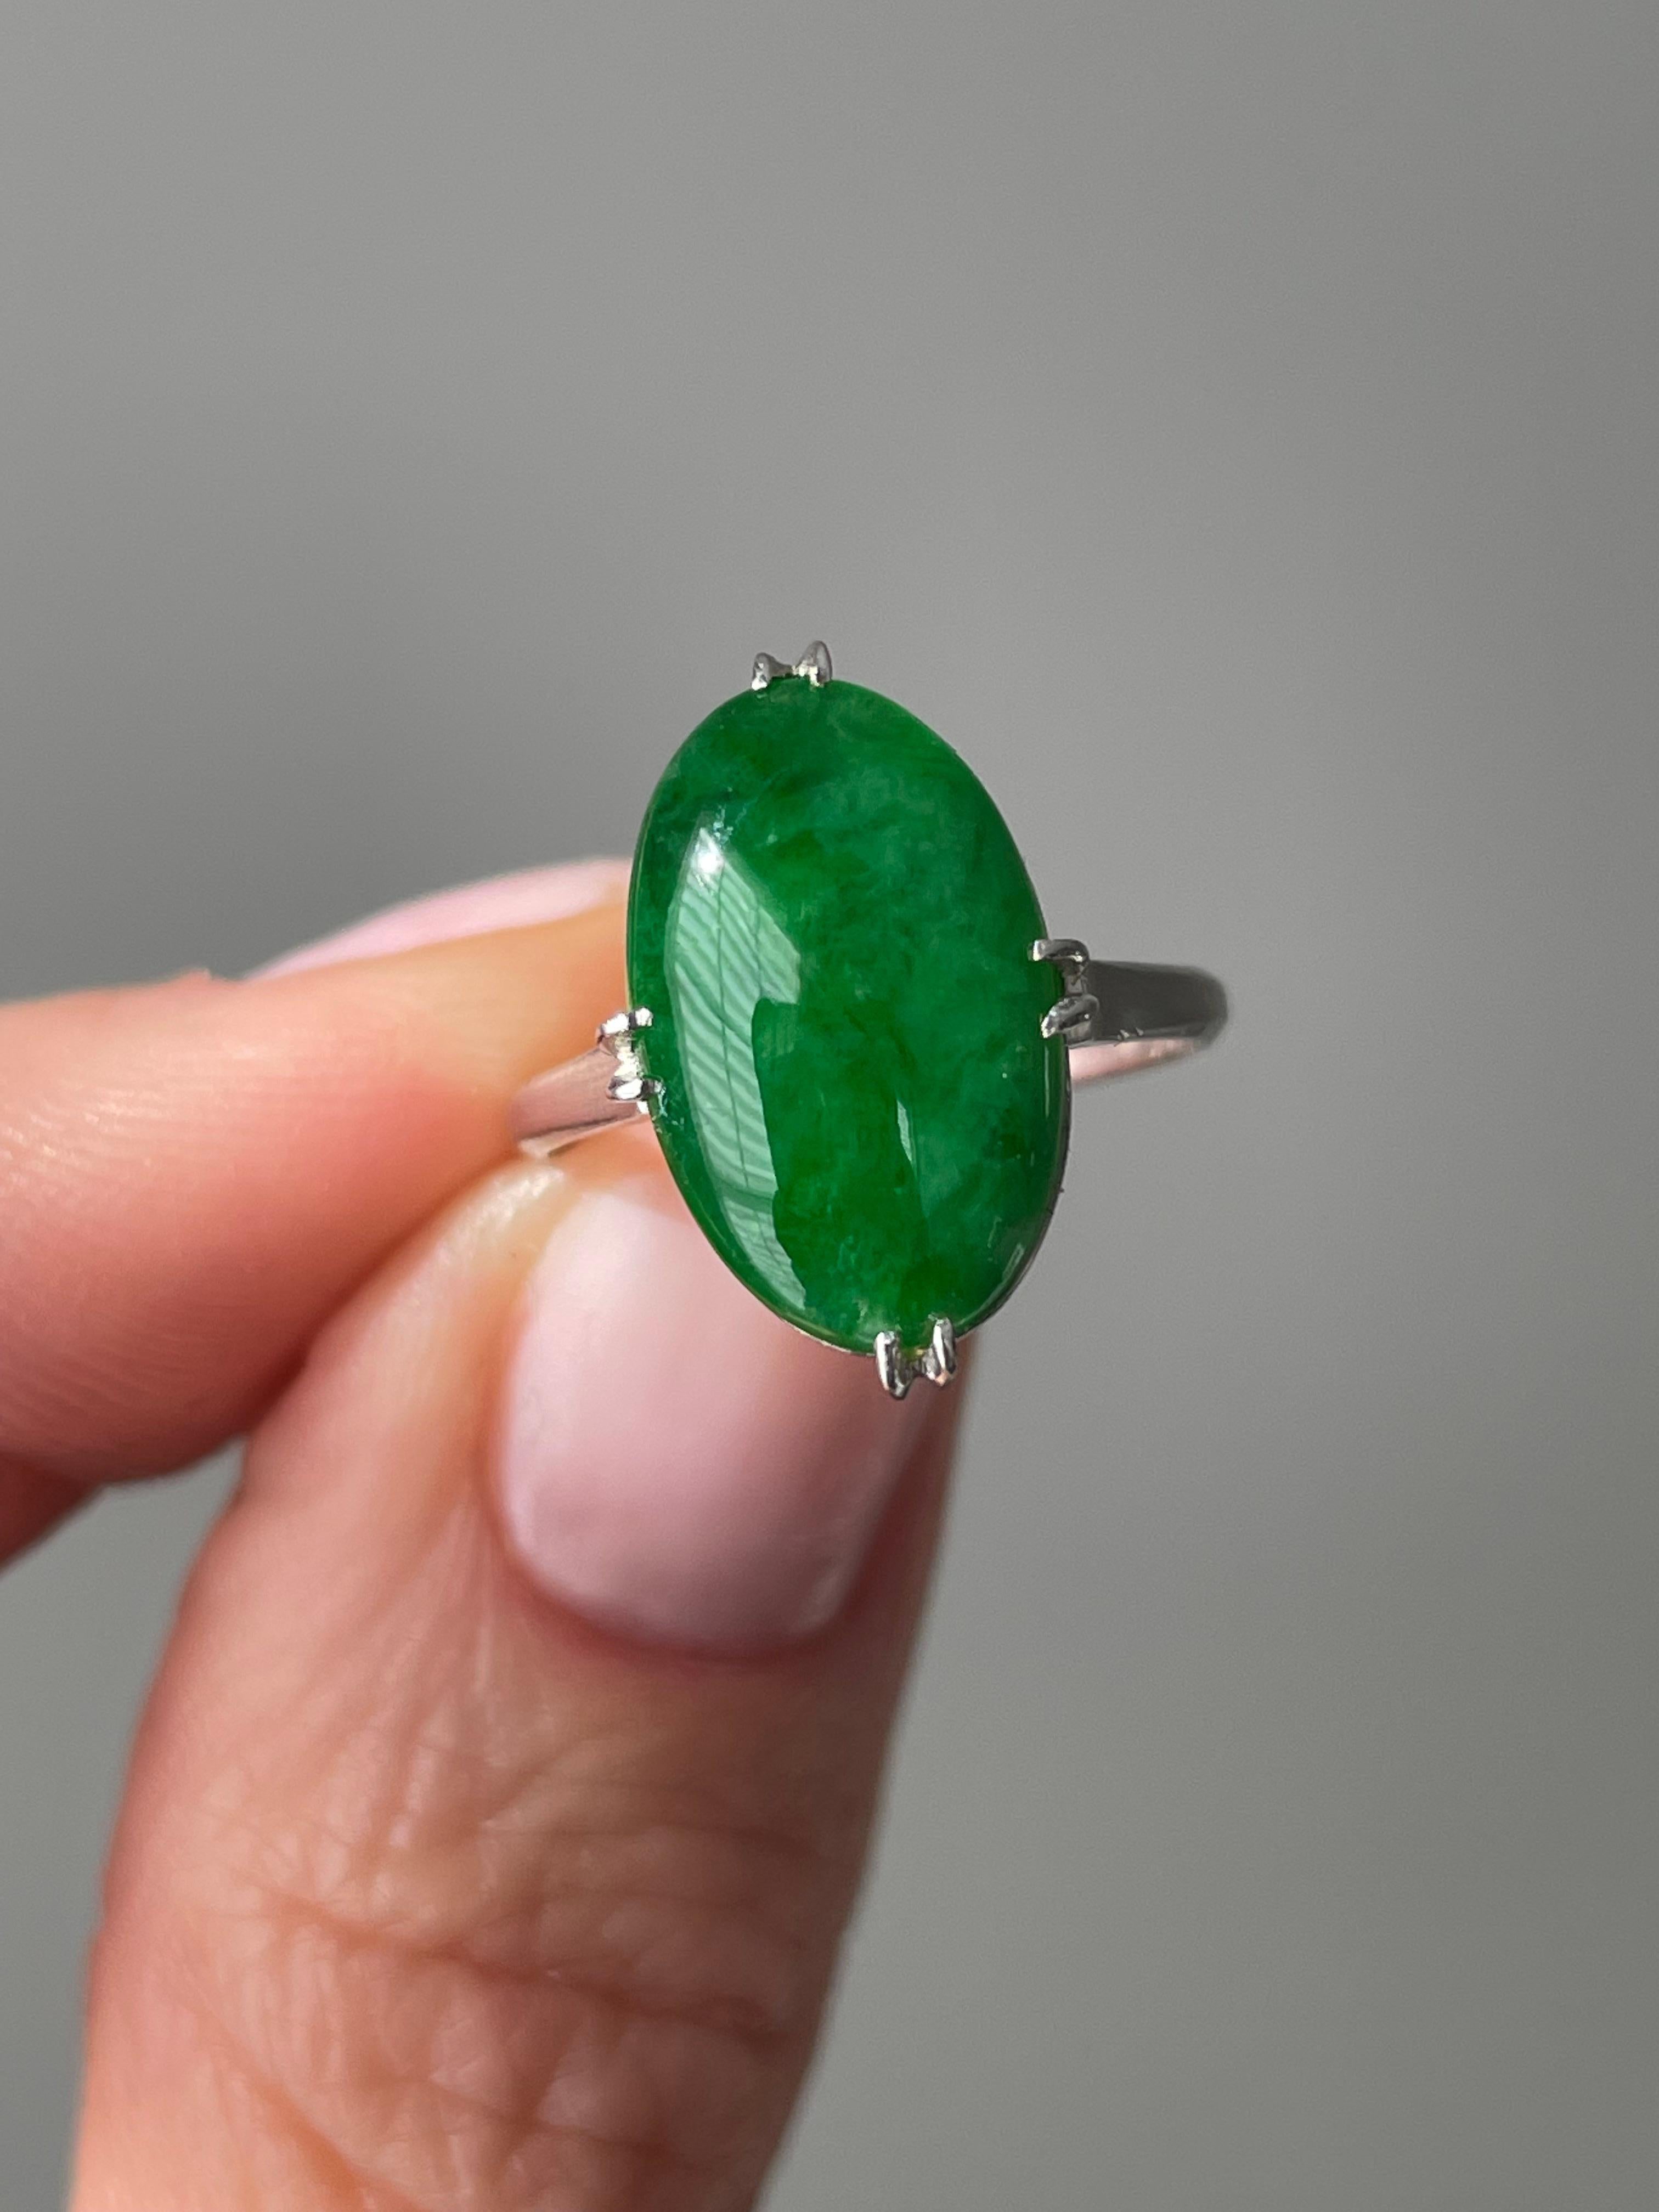 This classic Art Deco ring features a vibrant 4.26 carat natural jade cabochon presented in a hand fabricated platinum setting. The cabochon is framed by split prongs at the compass points and finished with an elegantly reticulated under gallery.